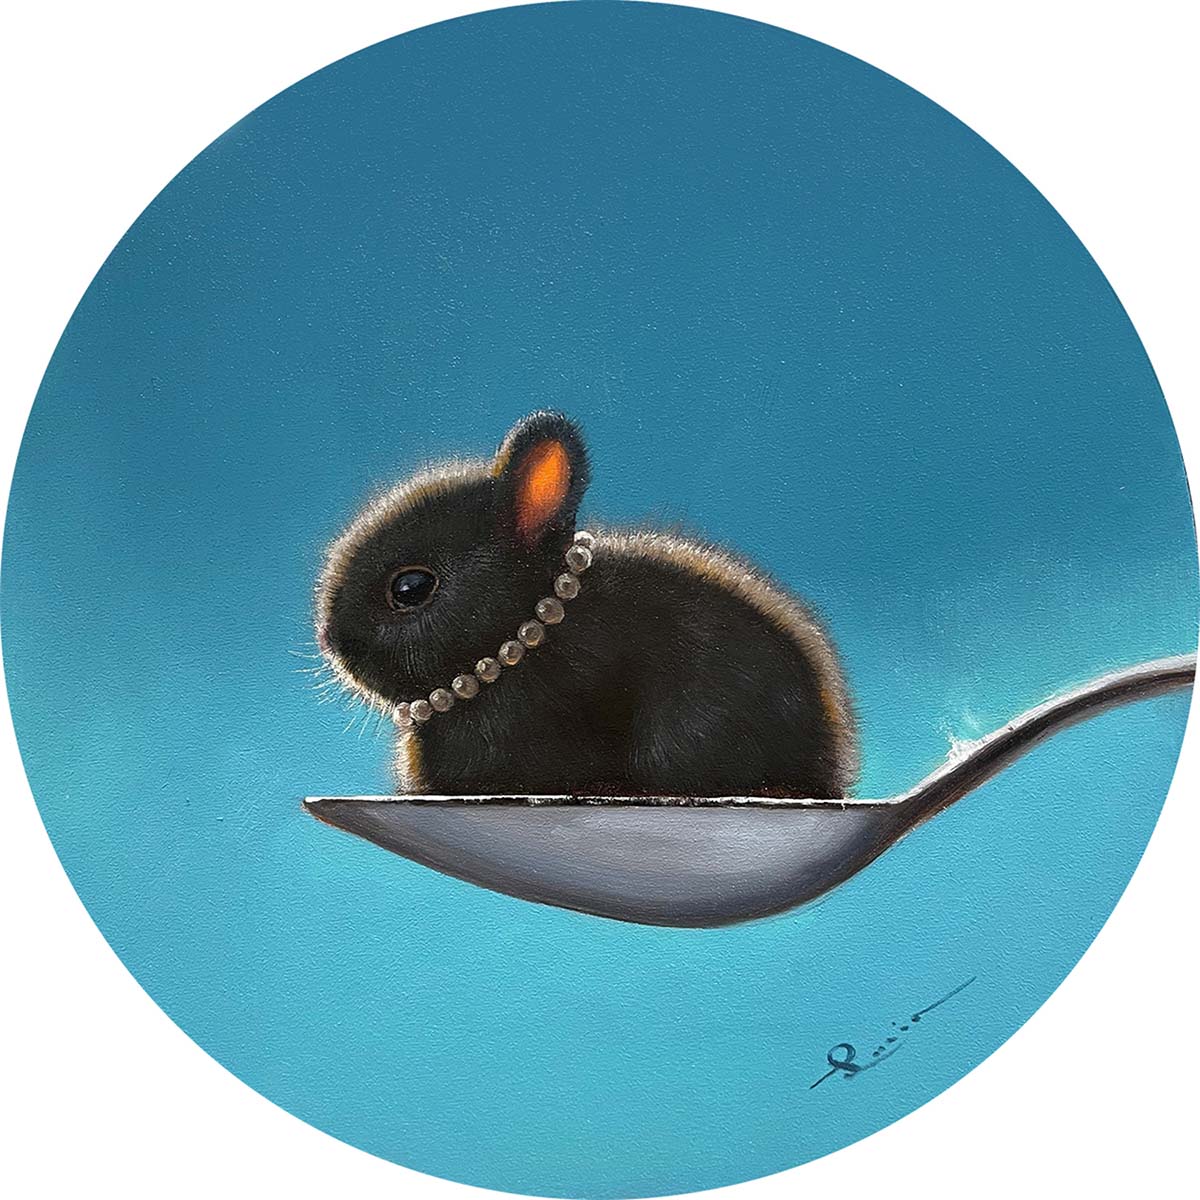 oil painting of bunny sitting on spoon